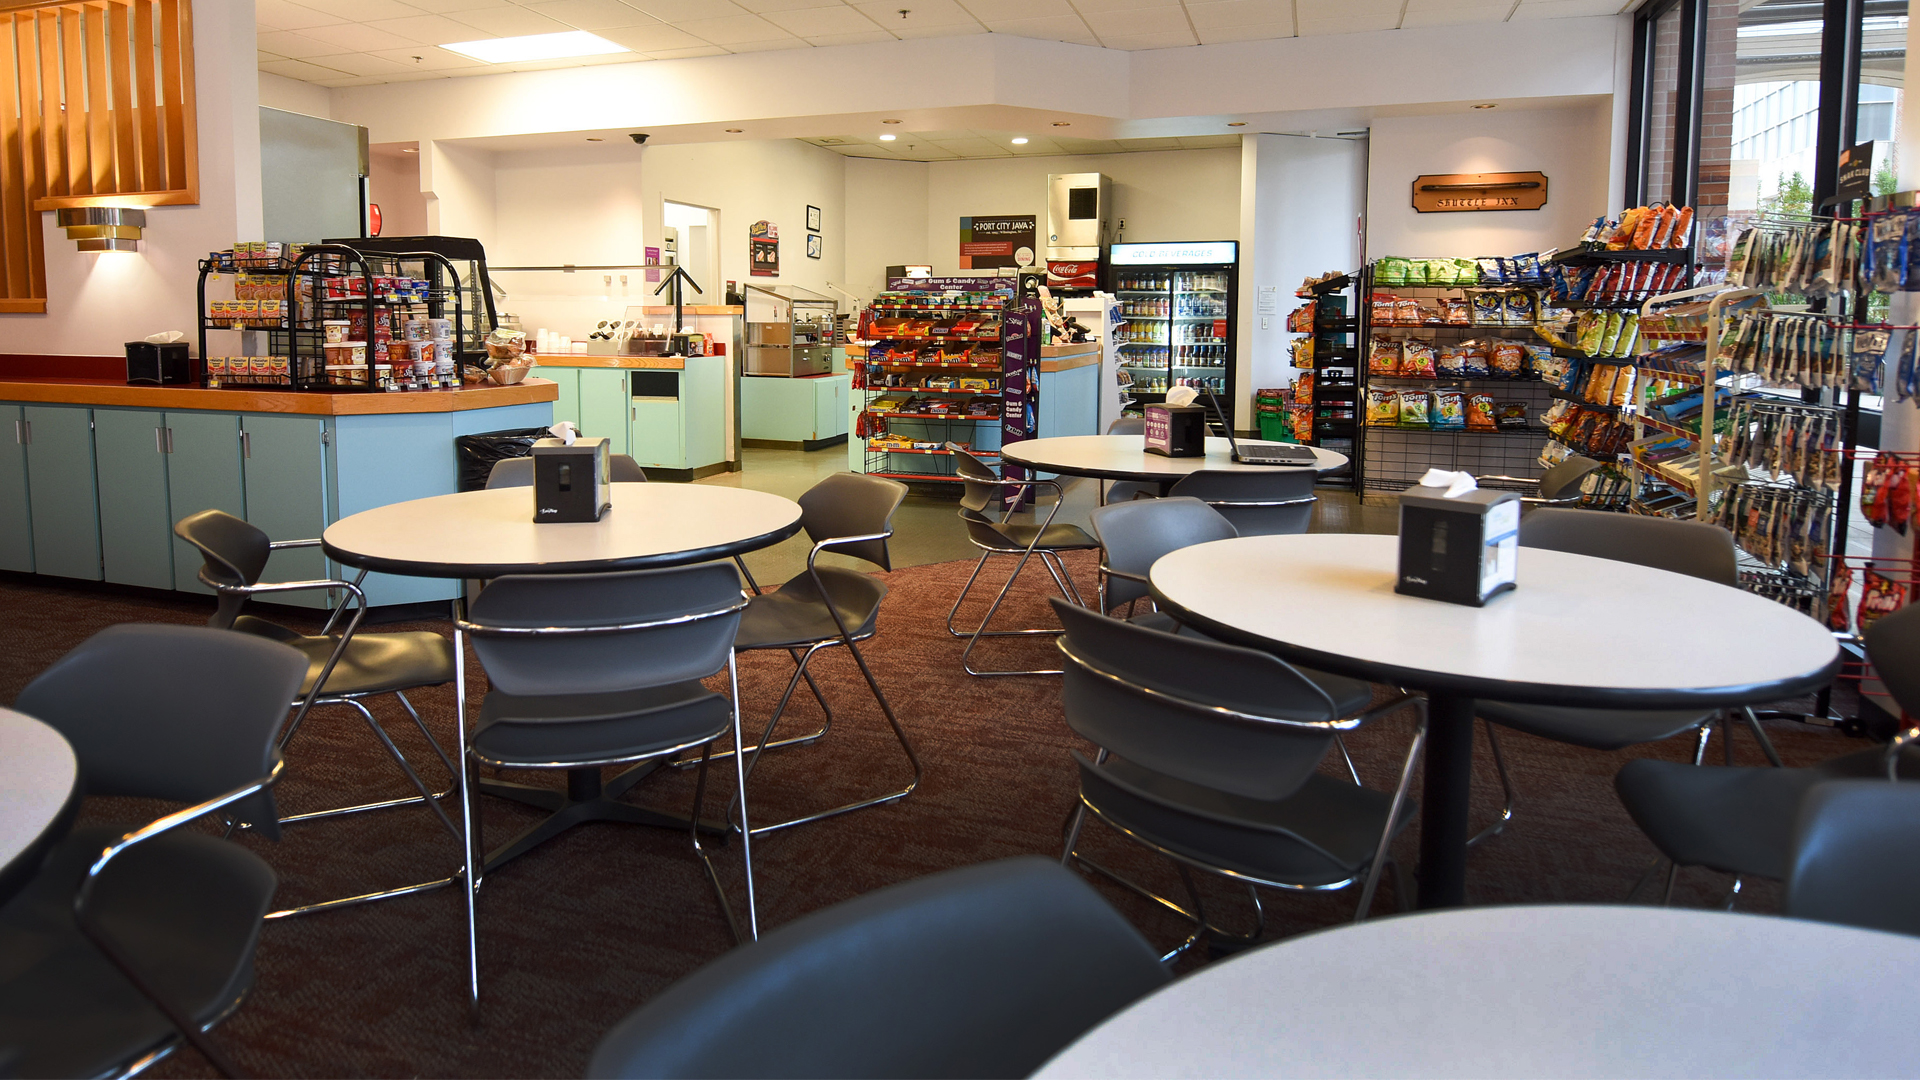 A dining area in the Shuttle Inn C-Store on Centennial Campus.